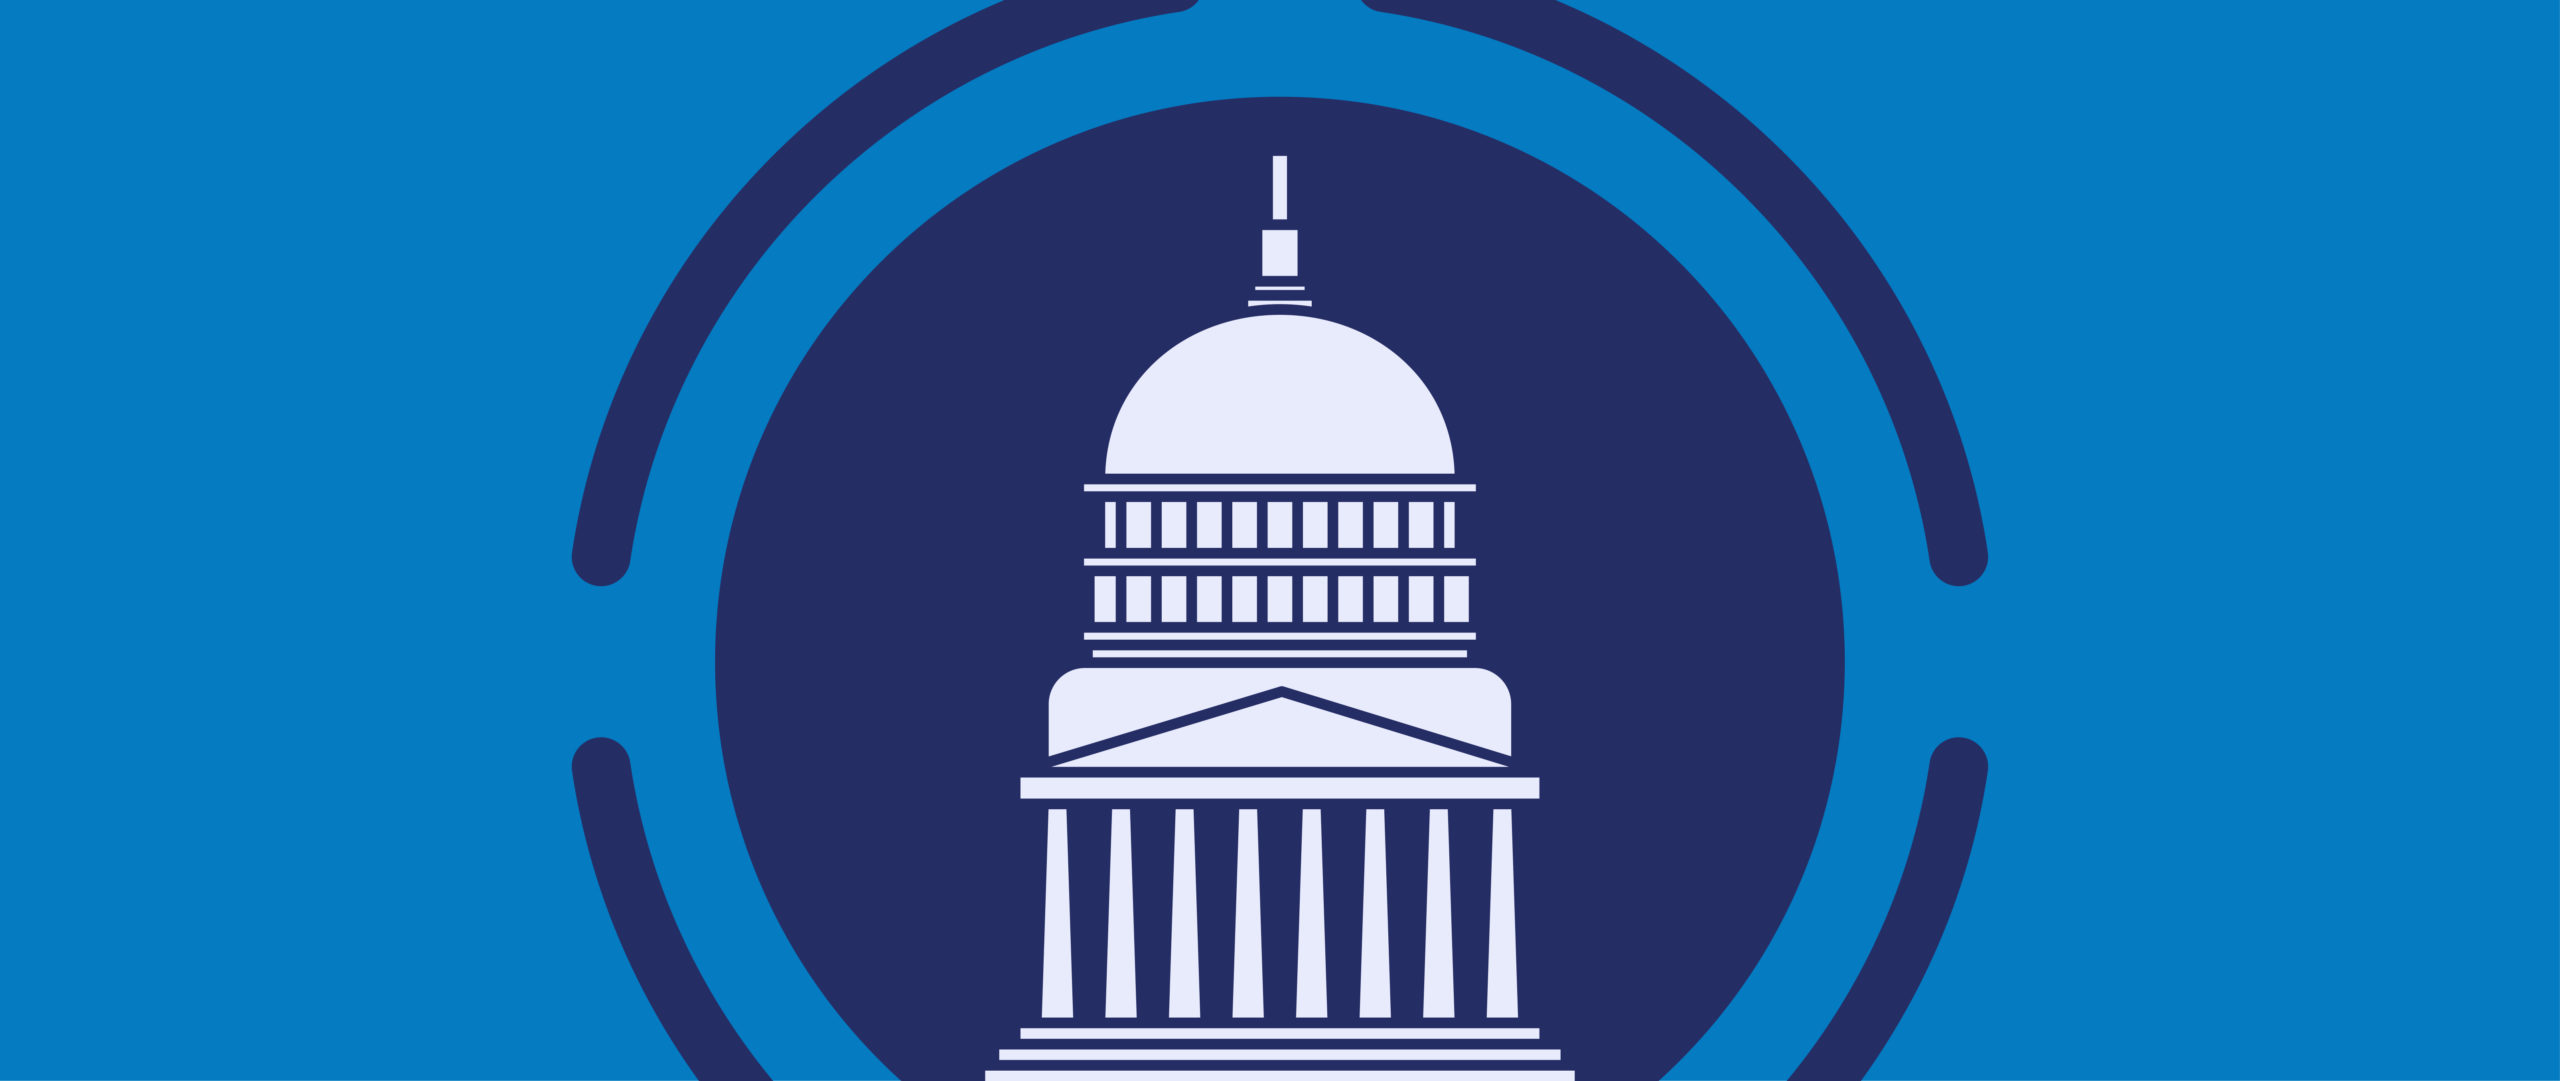 Blue illustration of political building with navy circle and stenciled circle behind it.